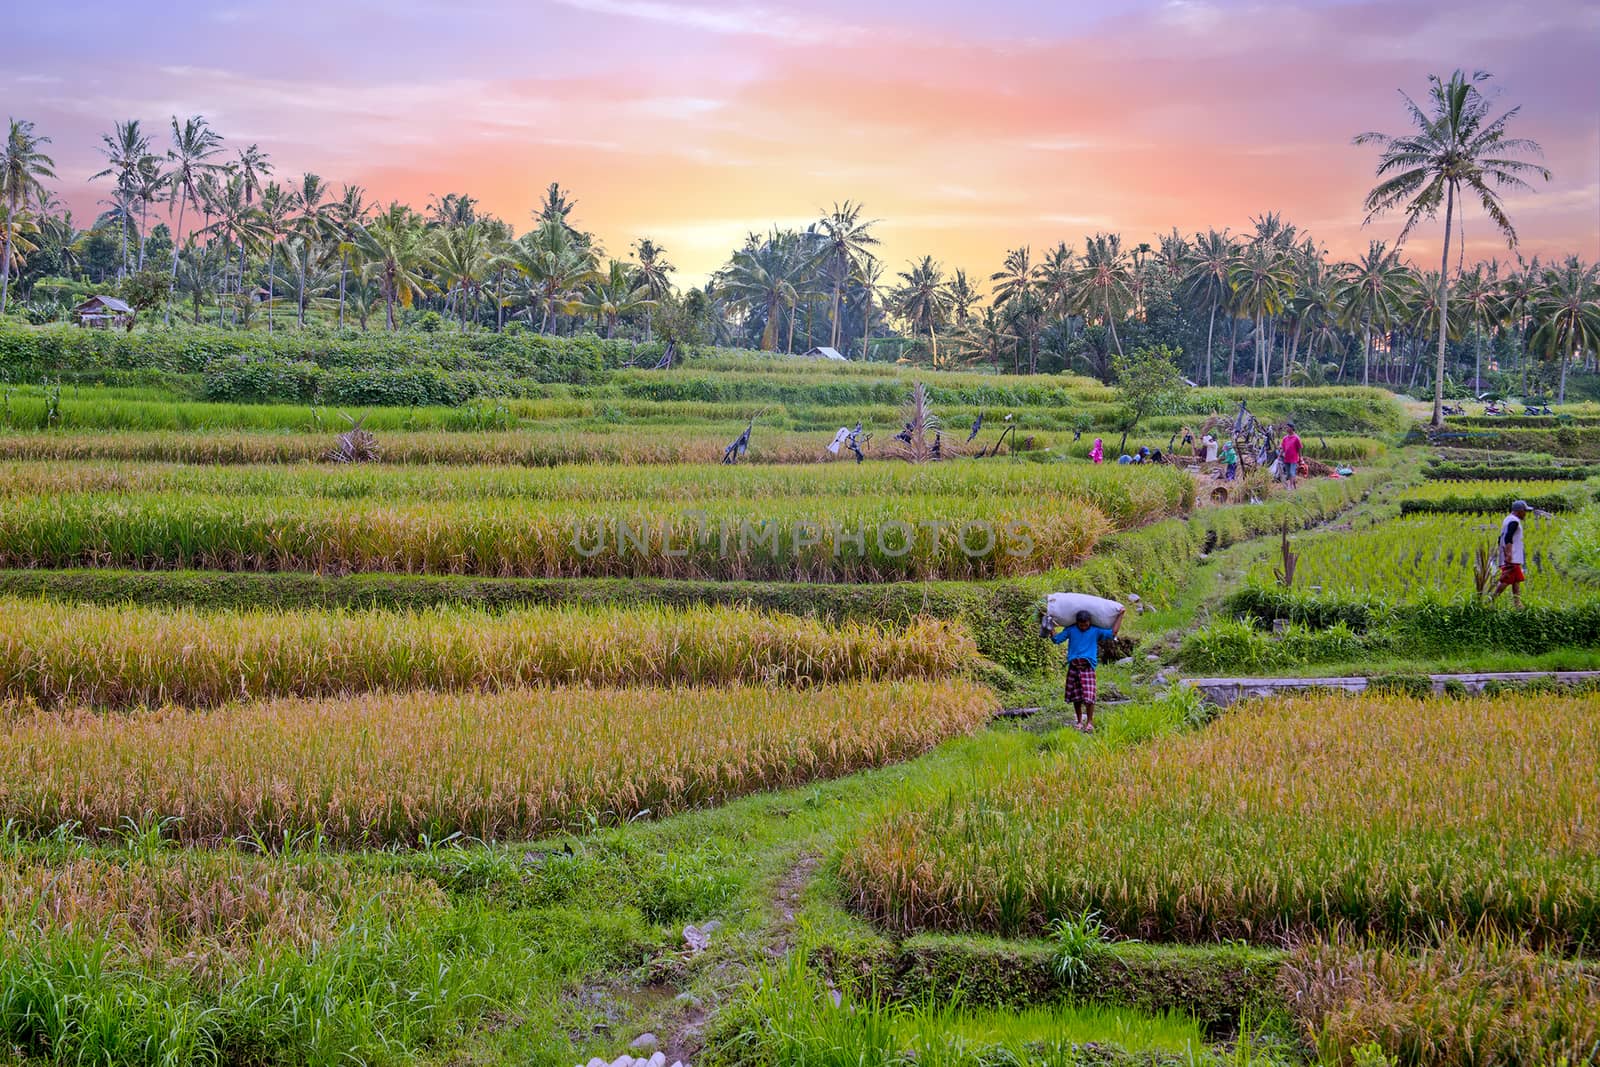 Workers on the land planting rice in the fields of Java Indonesia